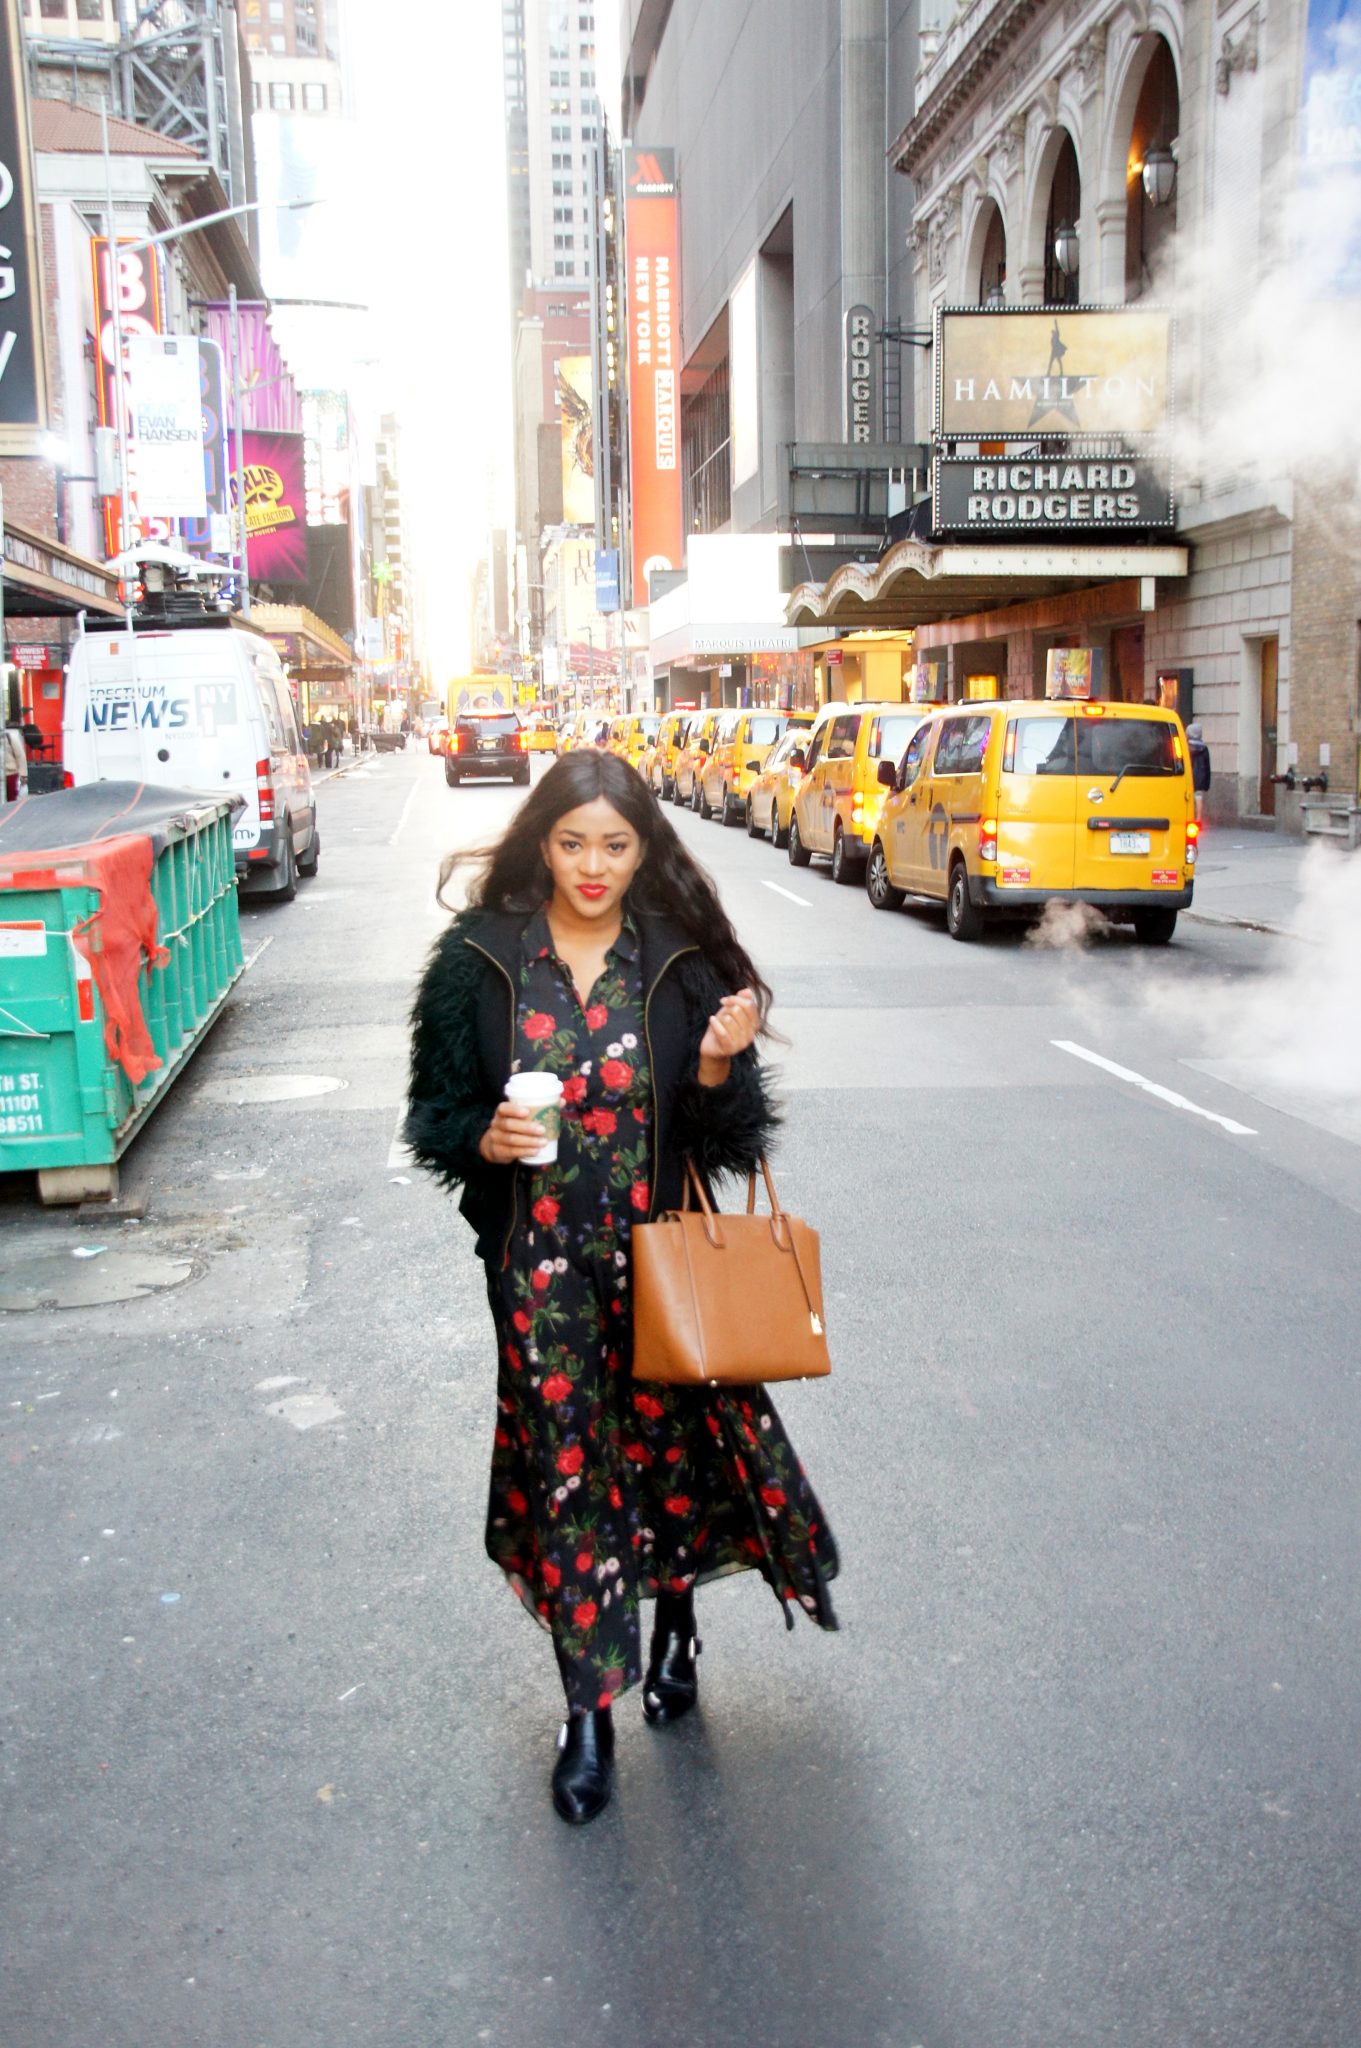 Wearing a floral maxi dress in the streets of New York